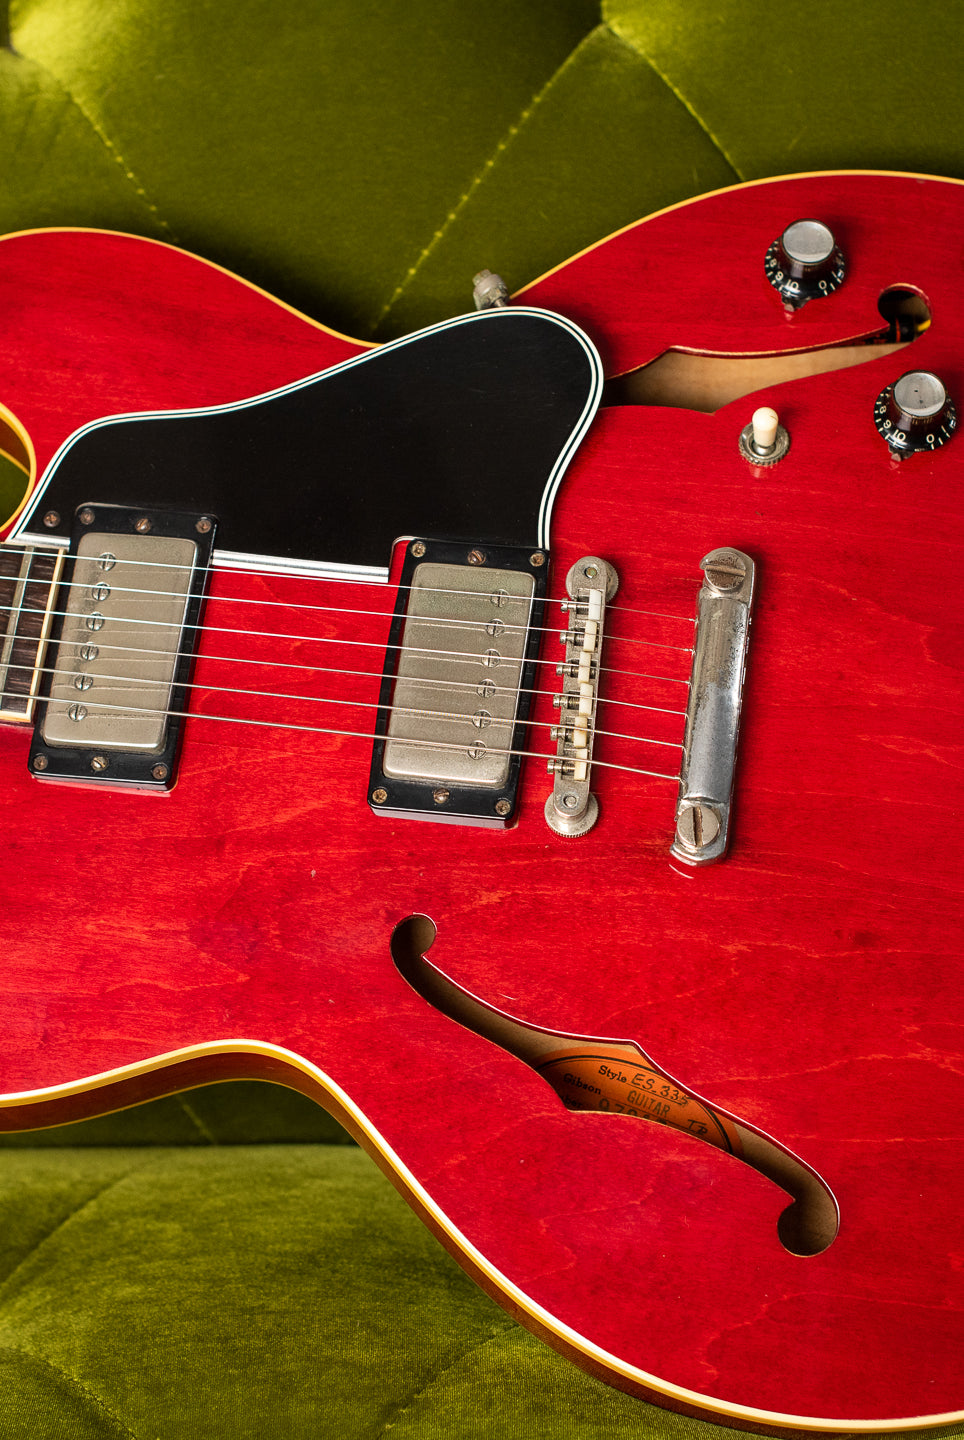 1963 Gibson ES-335 TDC electric guitar